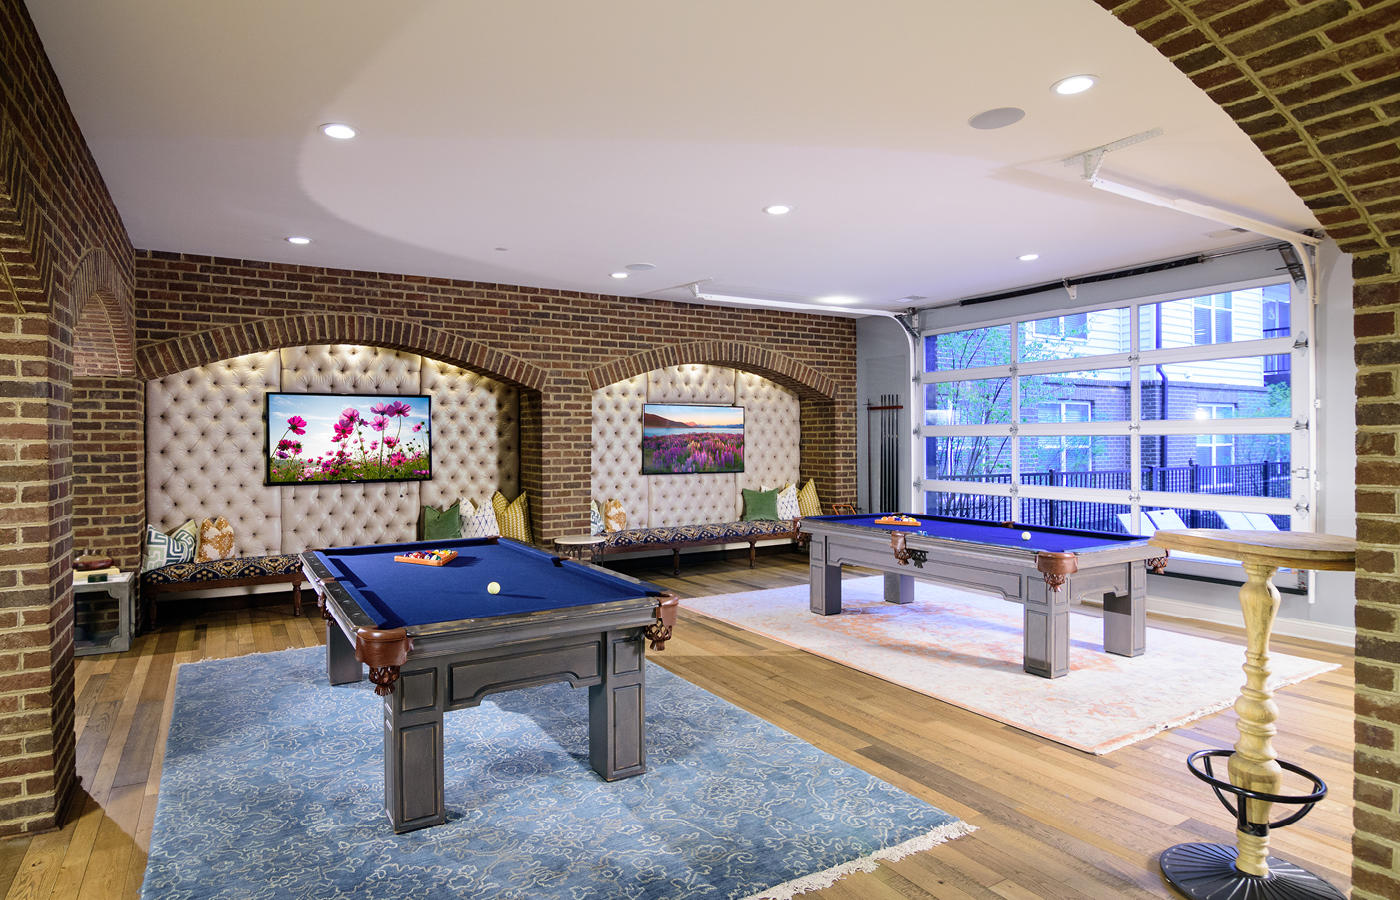 Bar area with HDTV wall and two billiards tables